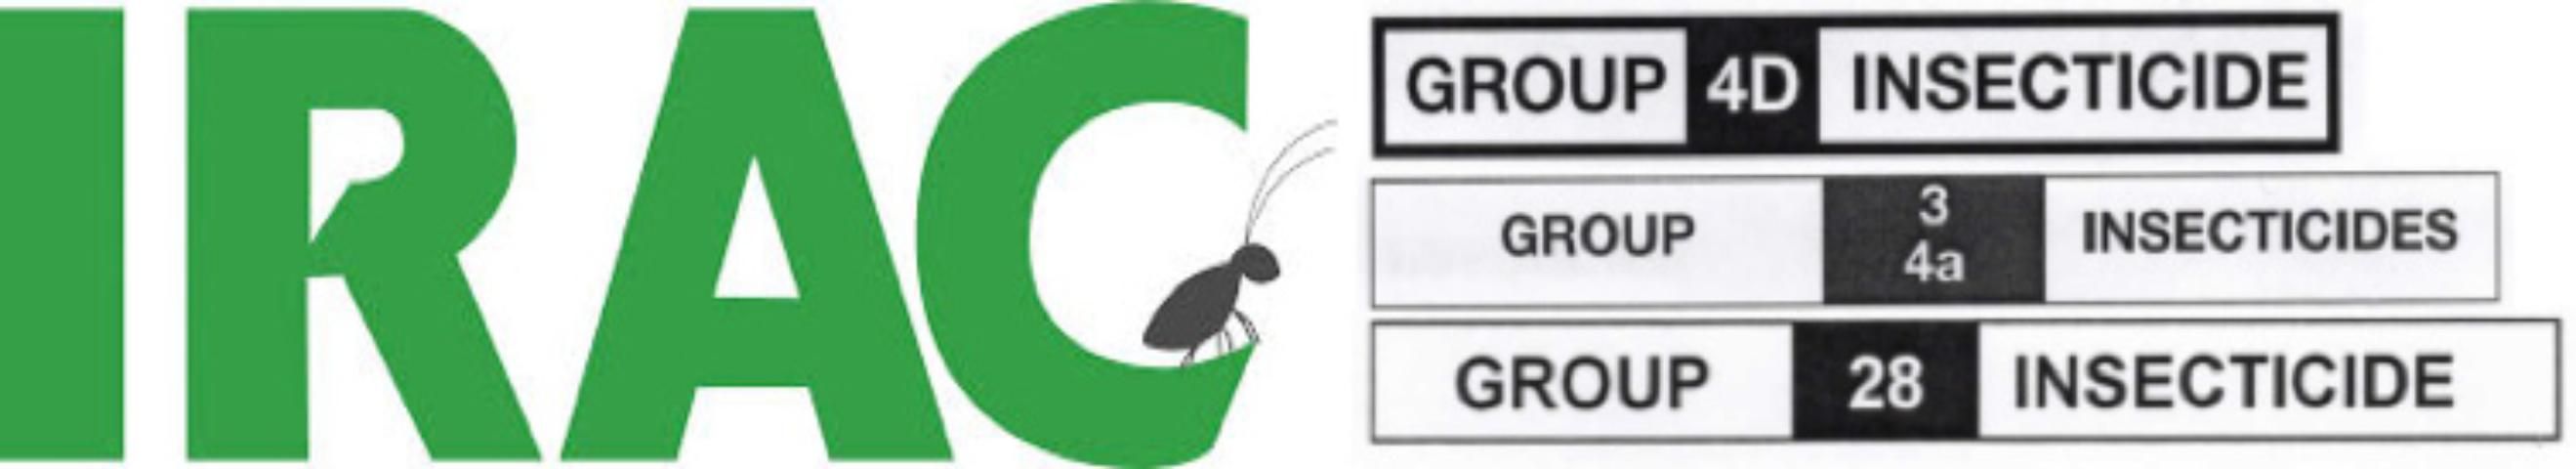 Figure 3. The Insecticide Resistance Action Committee (IRAC) classifies insecticides by number and letter designations based on their mode of action, or the mechanism by which they kill a pest. Insecticide labels will have the IRAC number and letter designation at the top of the label, which appears as shown in this figure.